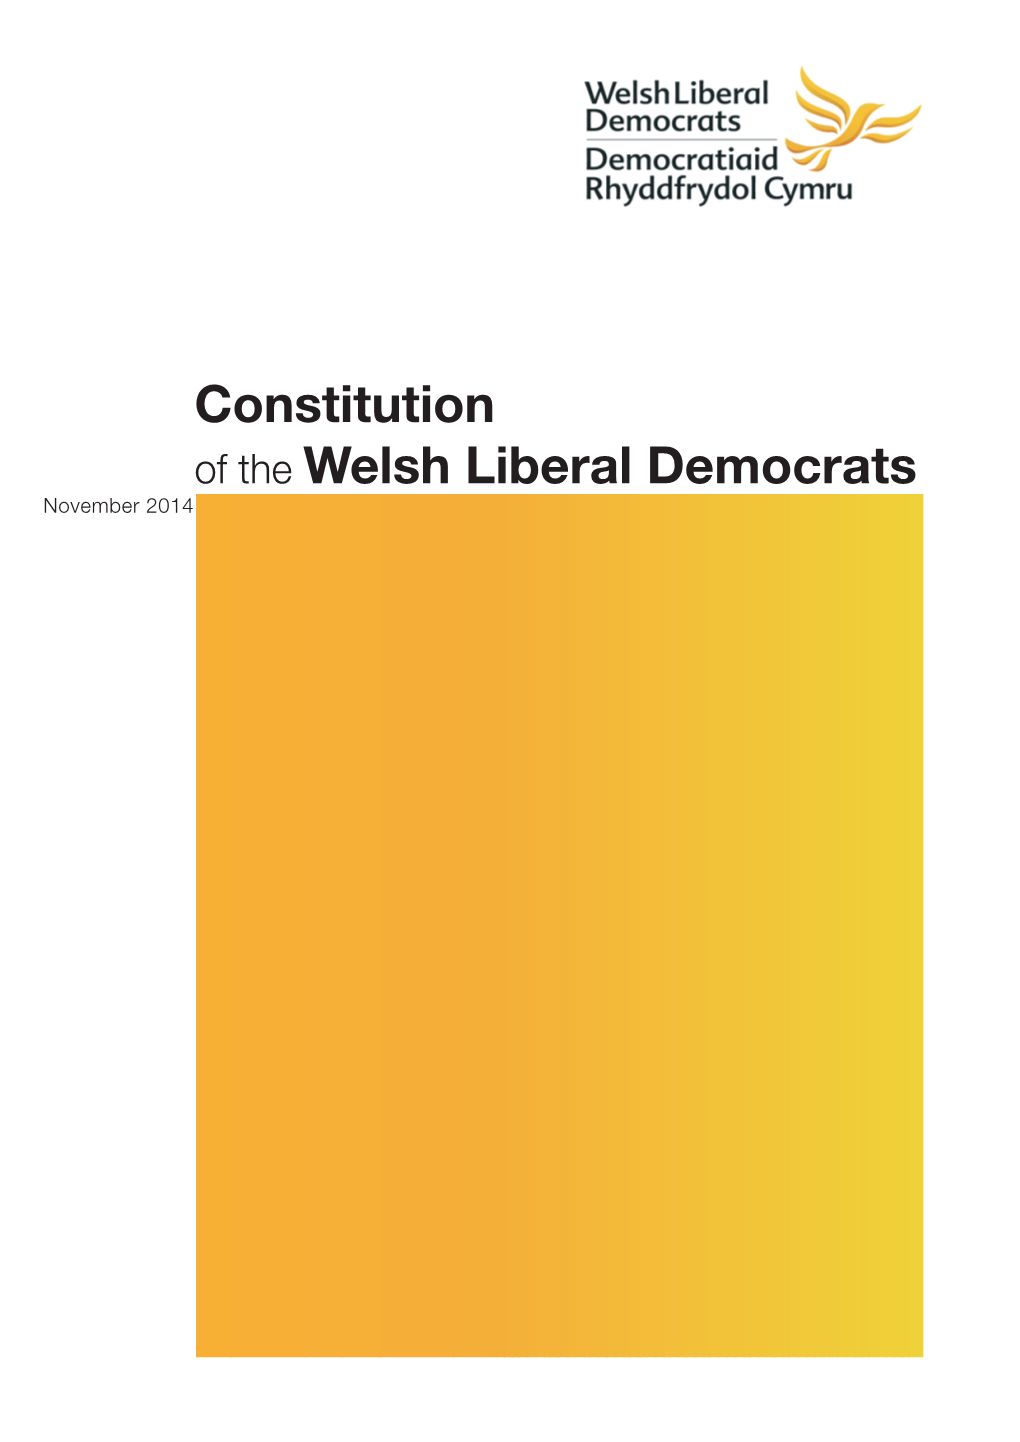 Constitution of the Welsh Liberal Democrats